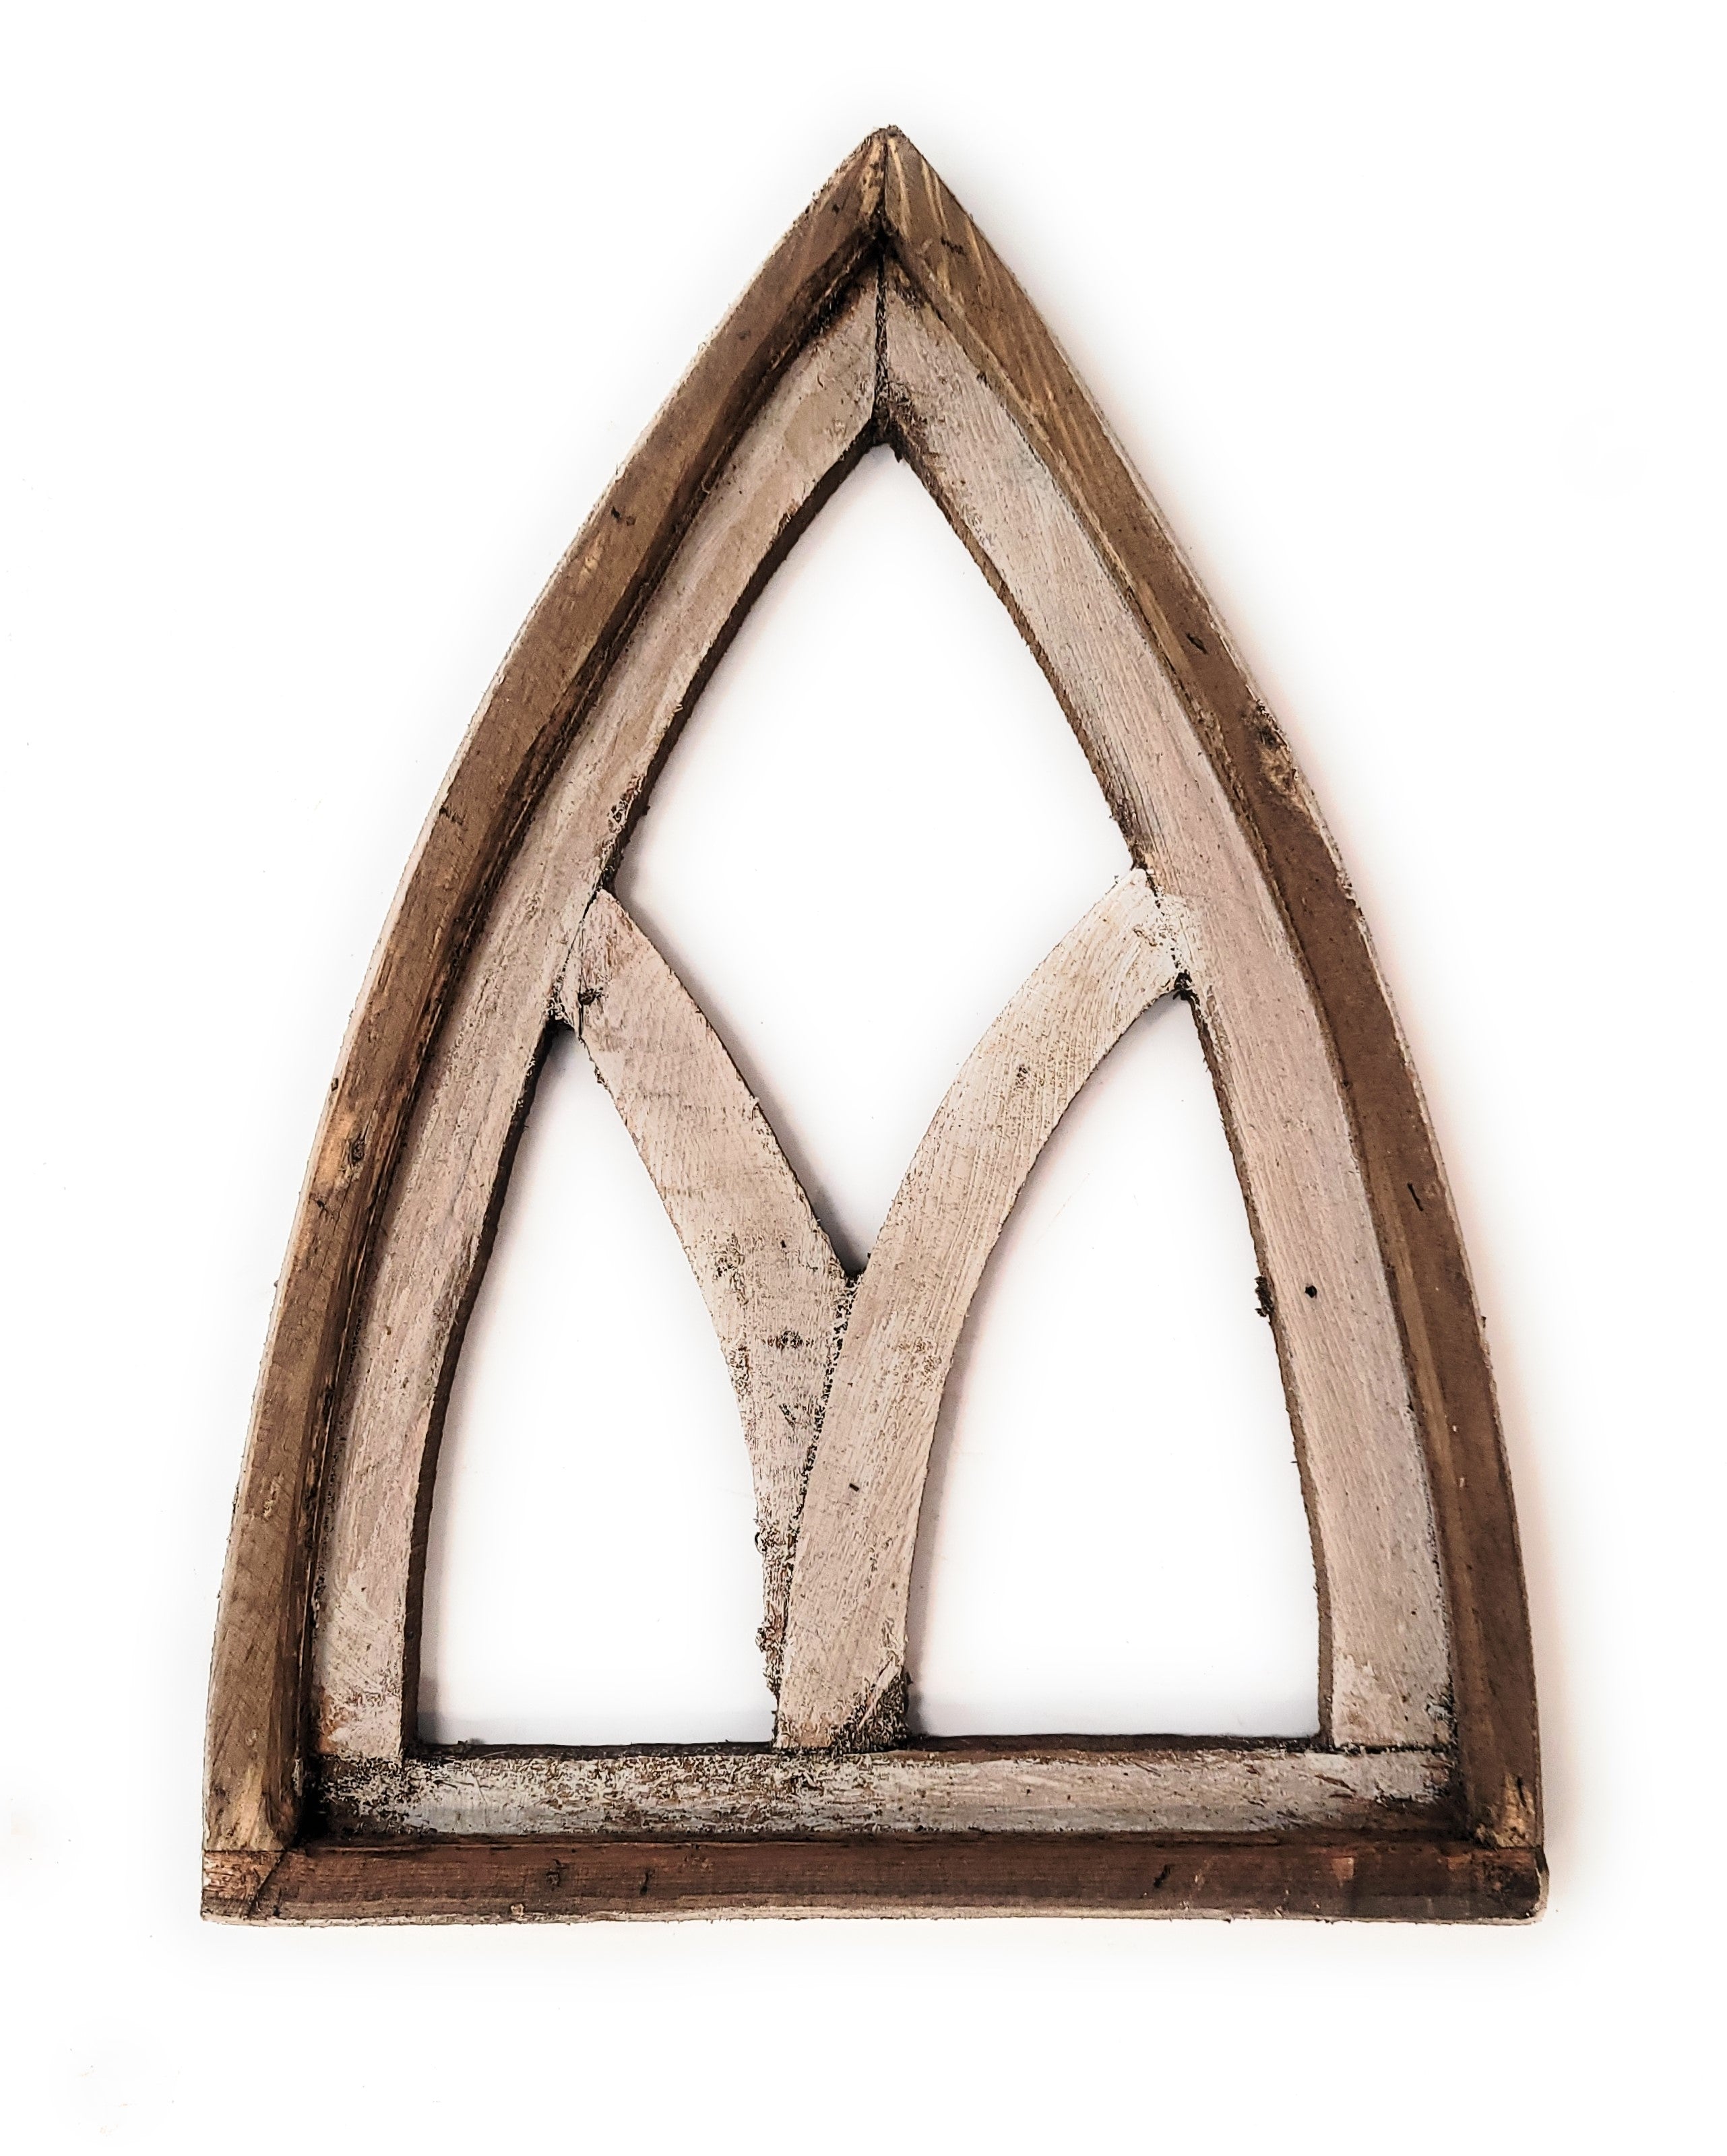 Mini Cathedral Wood Window - The Mini Cathedral- 2 Colors - Buy 1 or A Set of 2 Available - Ranch Junkie Mercantile LLC